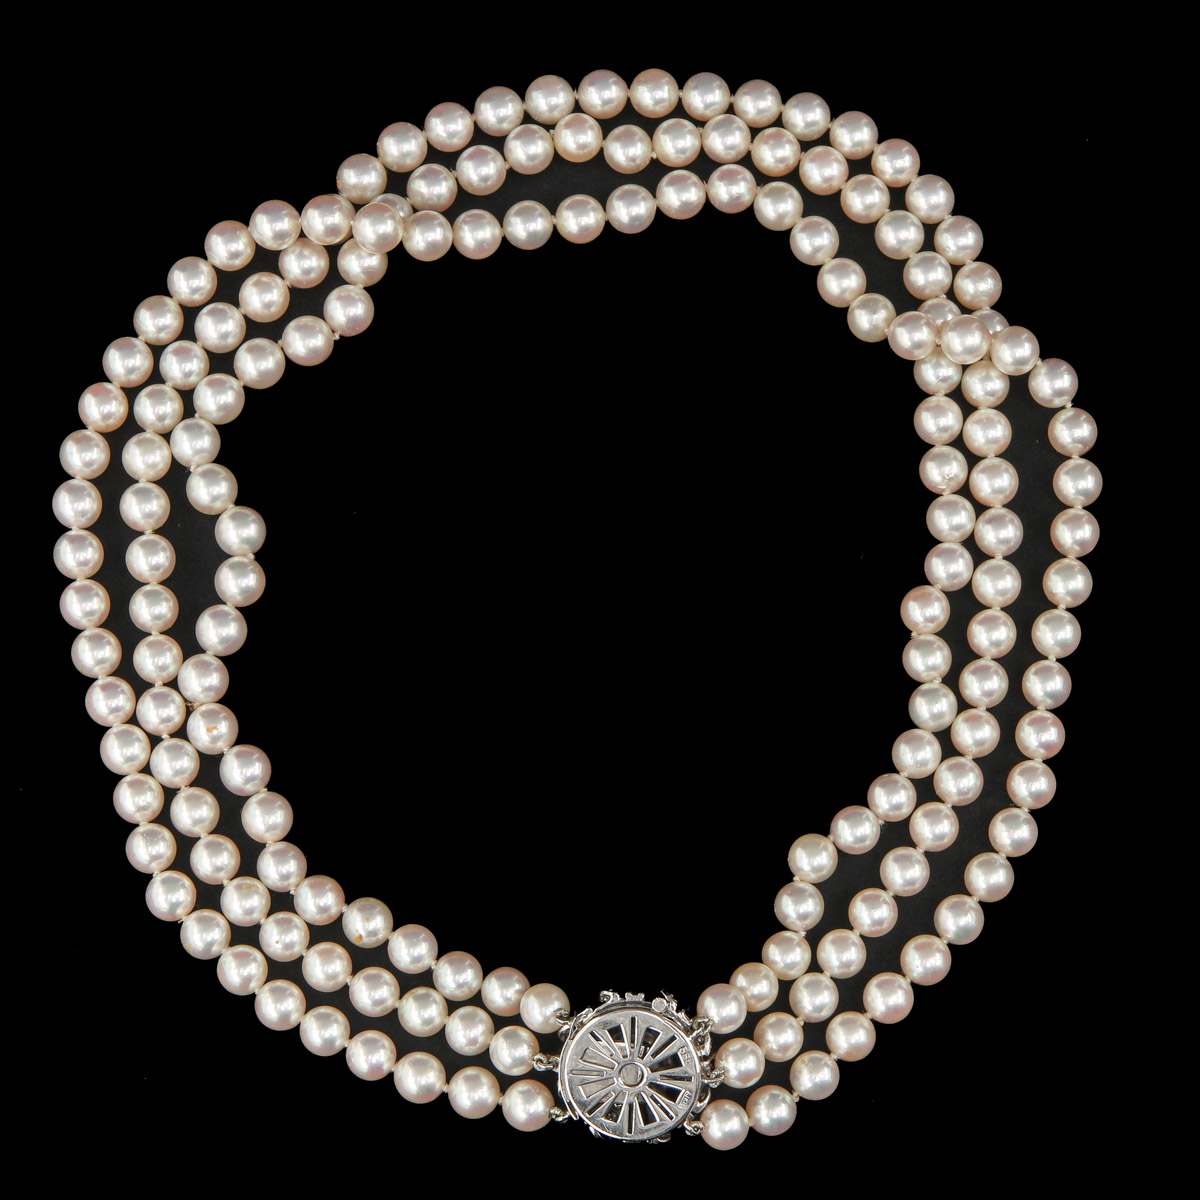 A Set of Pearl Jewelry - Image 9 of 10